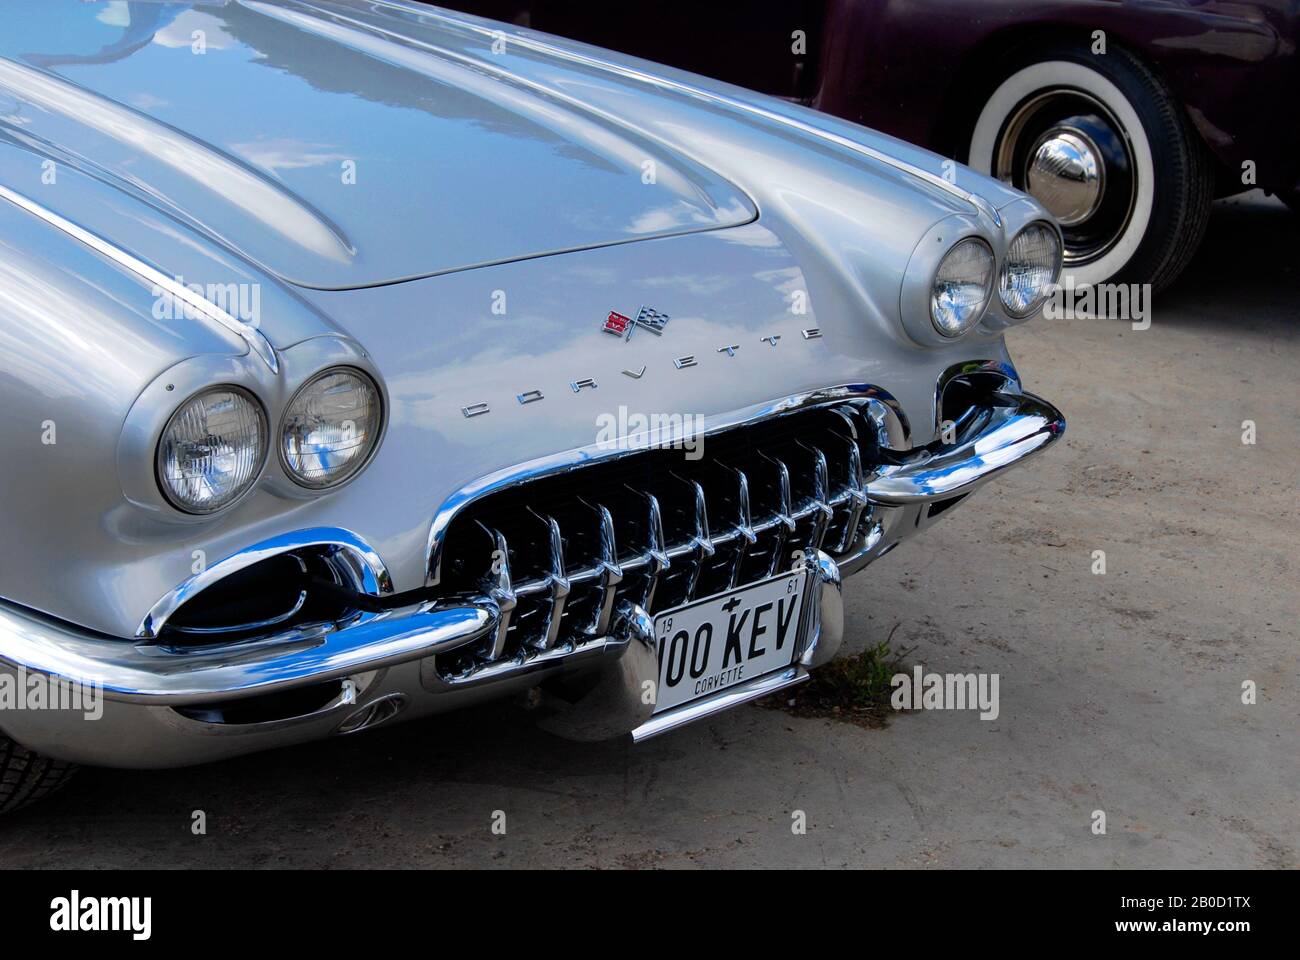 Front of Chevrolet Corvette on display at small local motor show Stock Photo